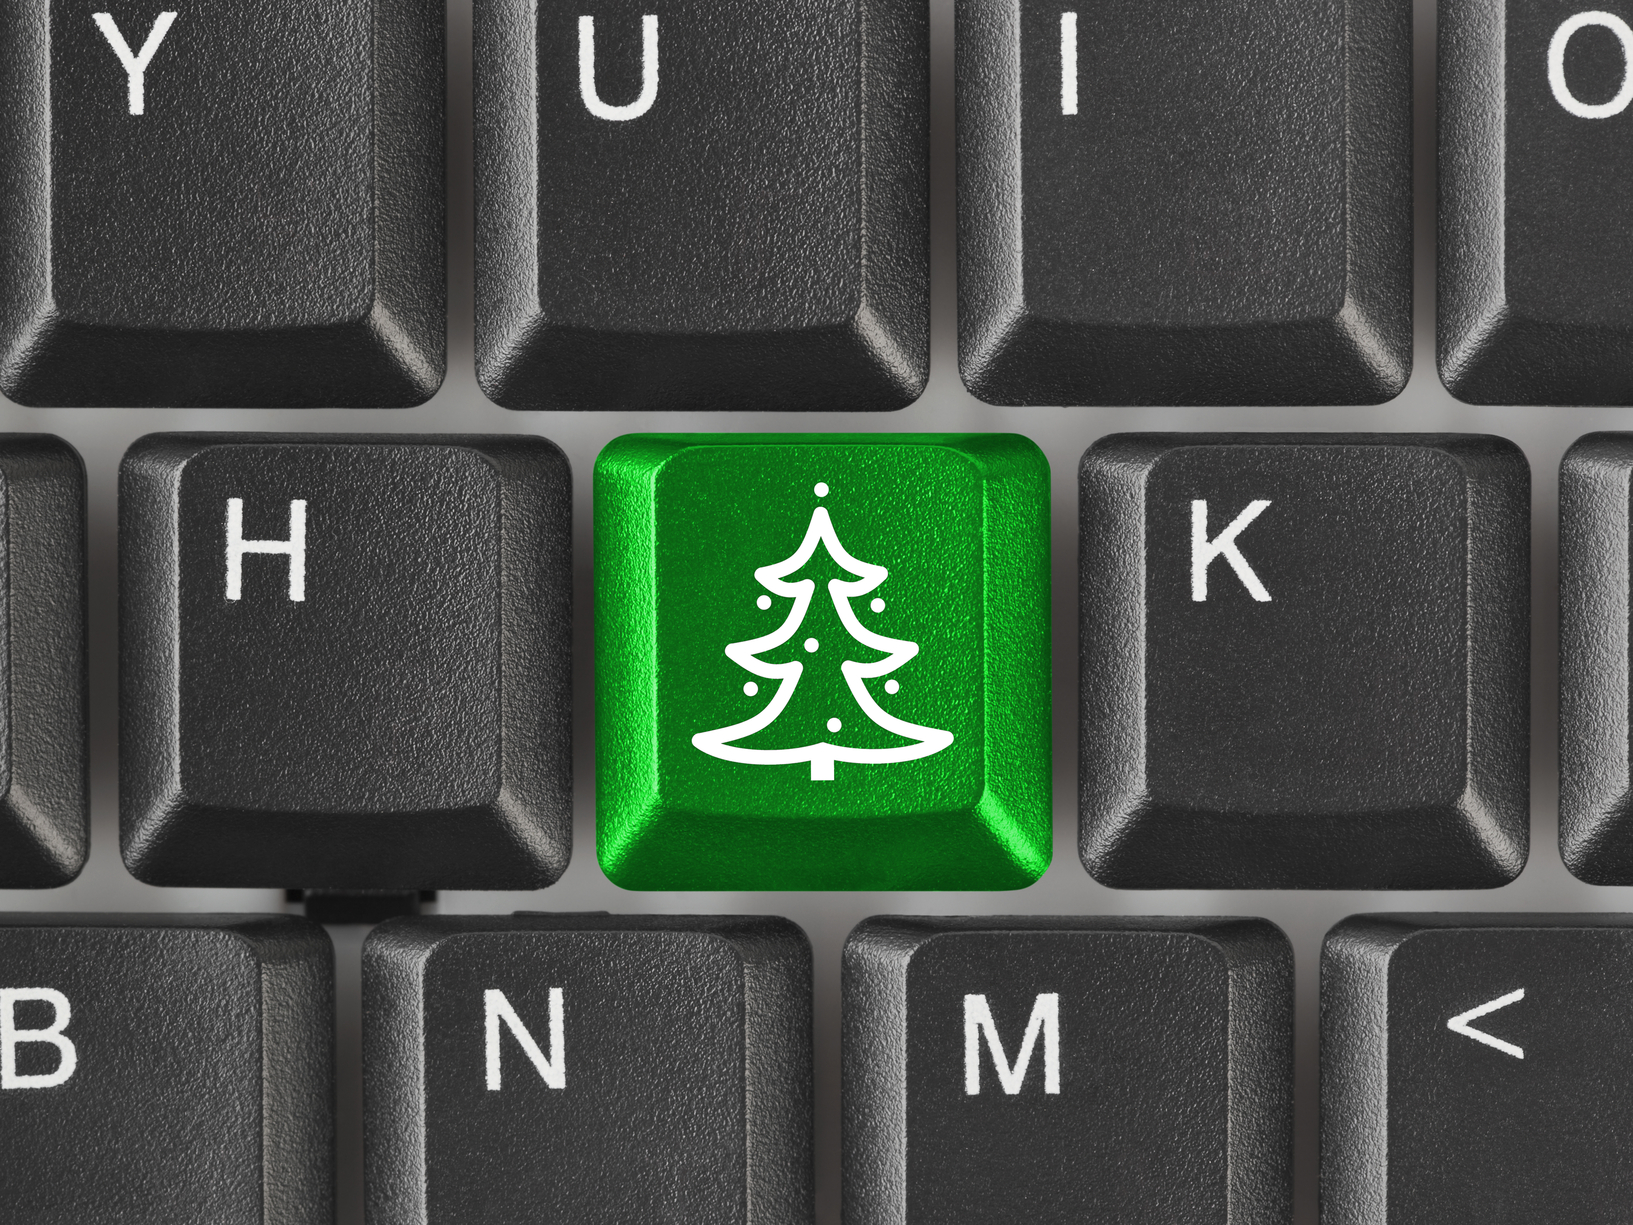 Holiday Marketing Tips for Small Businesses